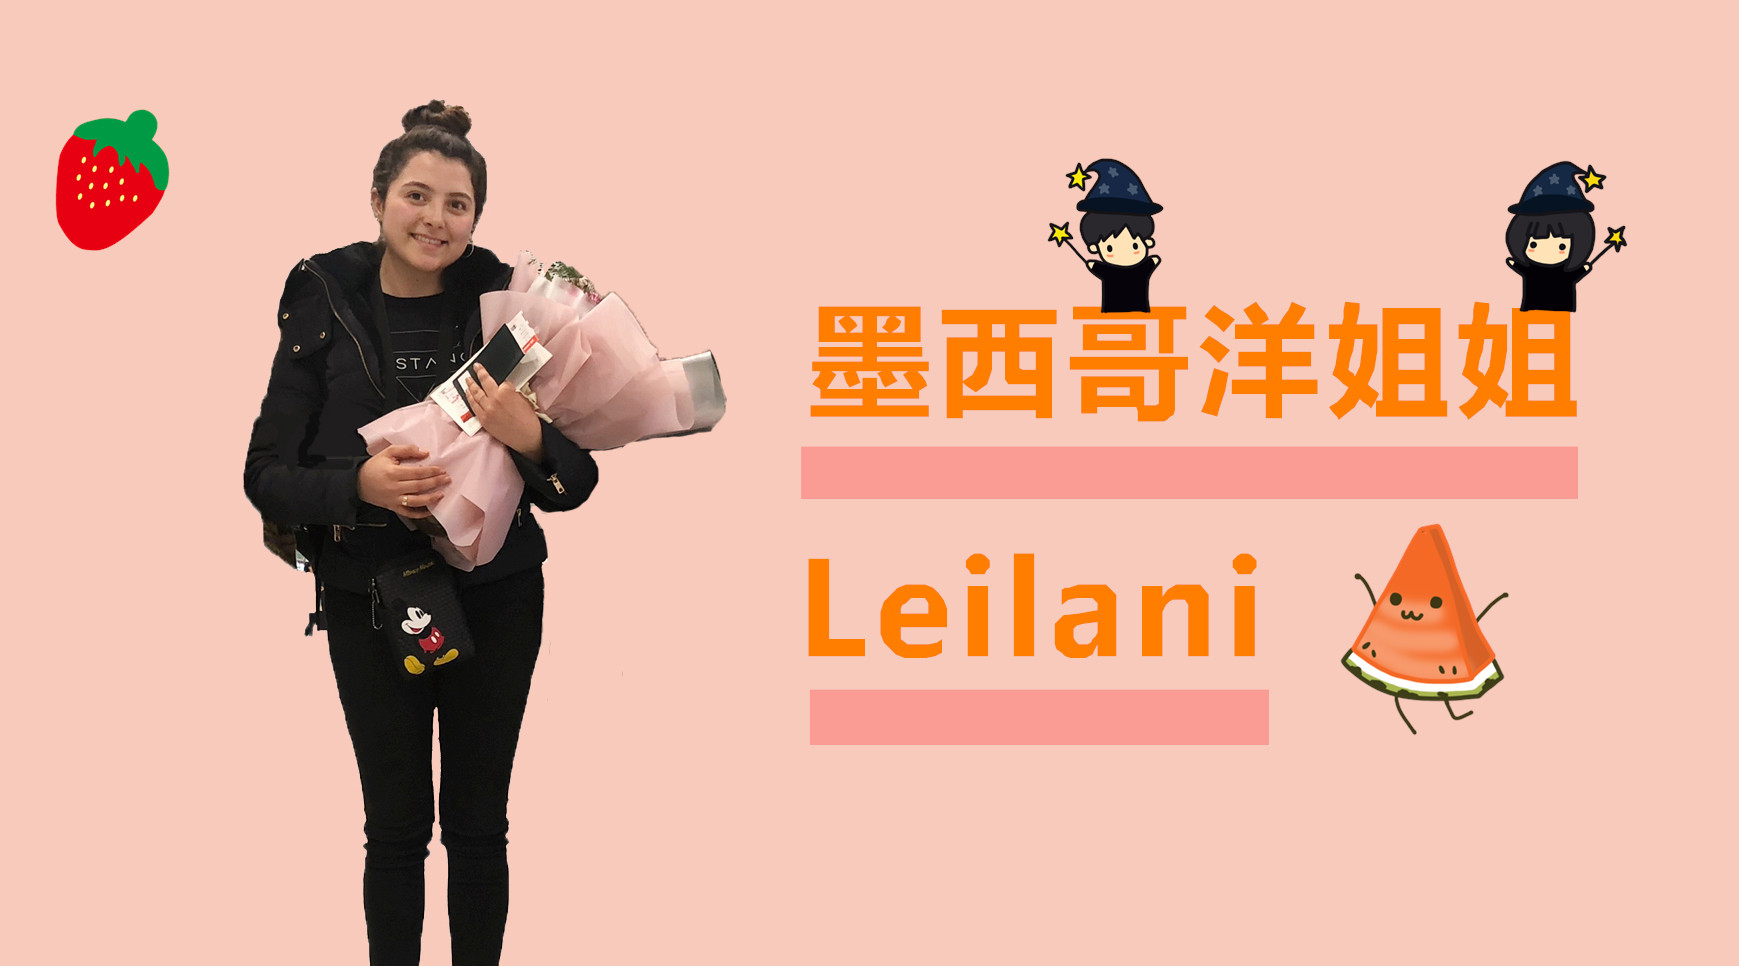 Welcome new Au pair/Home tutor Leilani from Mexico!